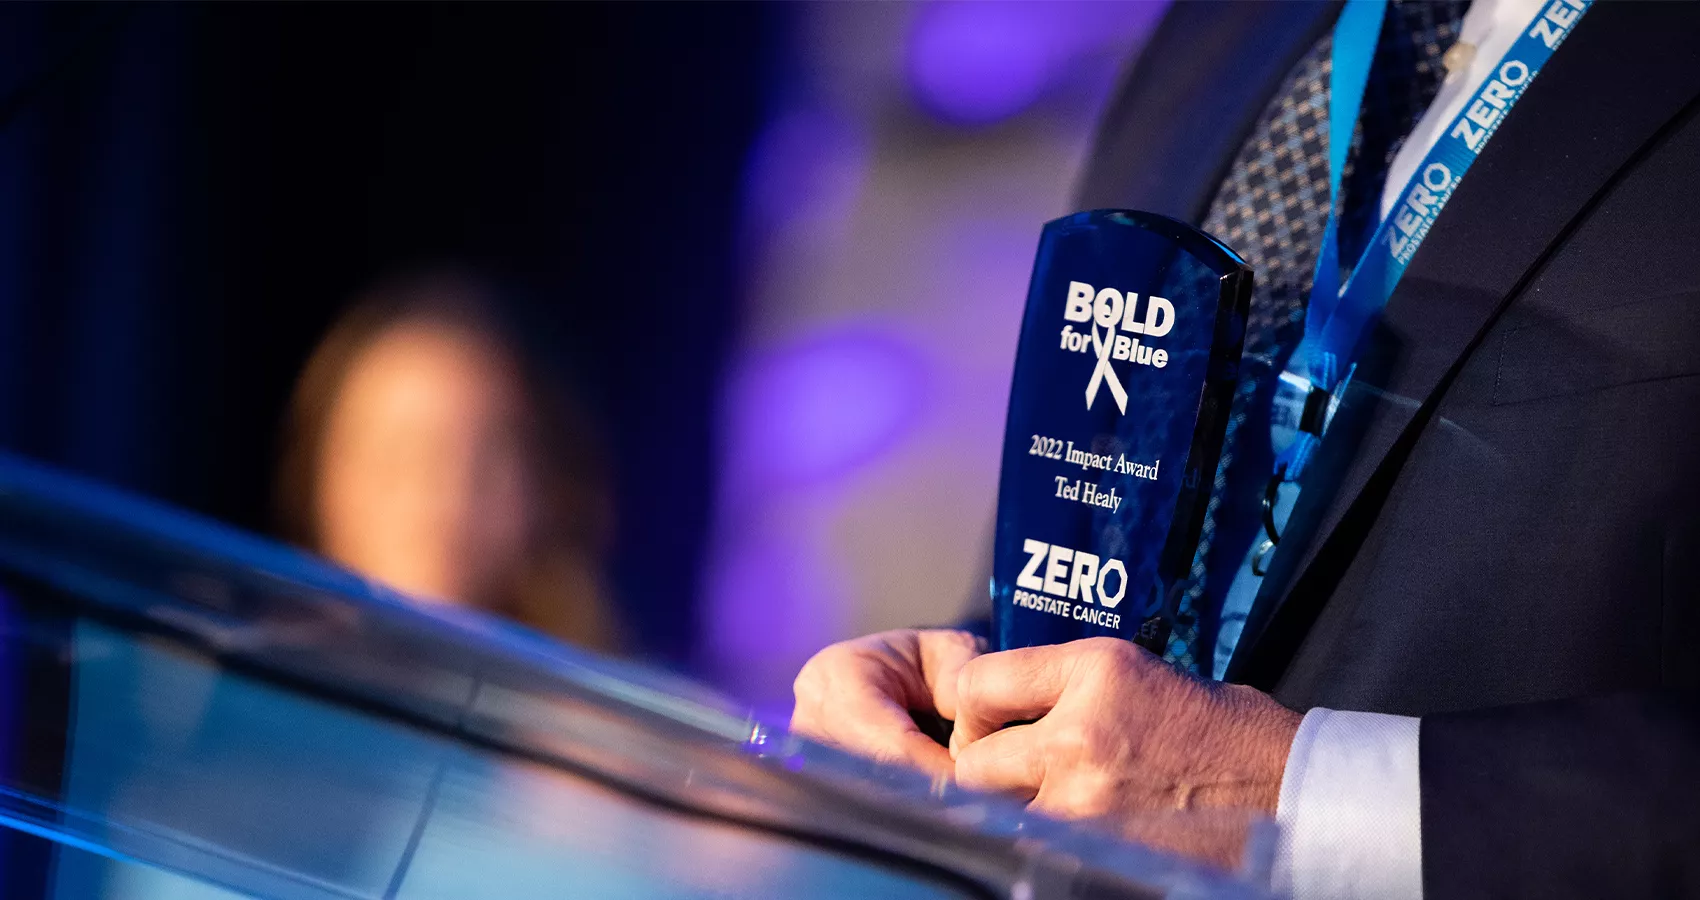 A shot of someone's hands at the podium holding a Bold for Blue award